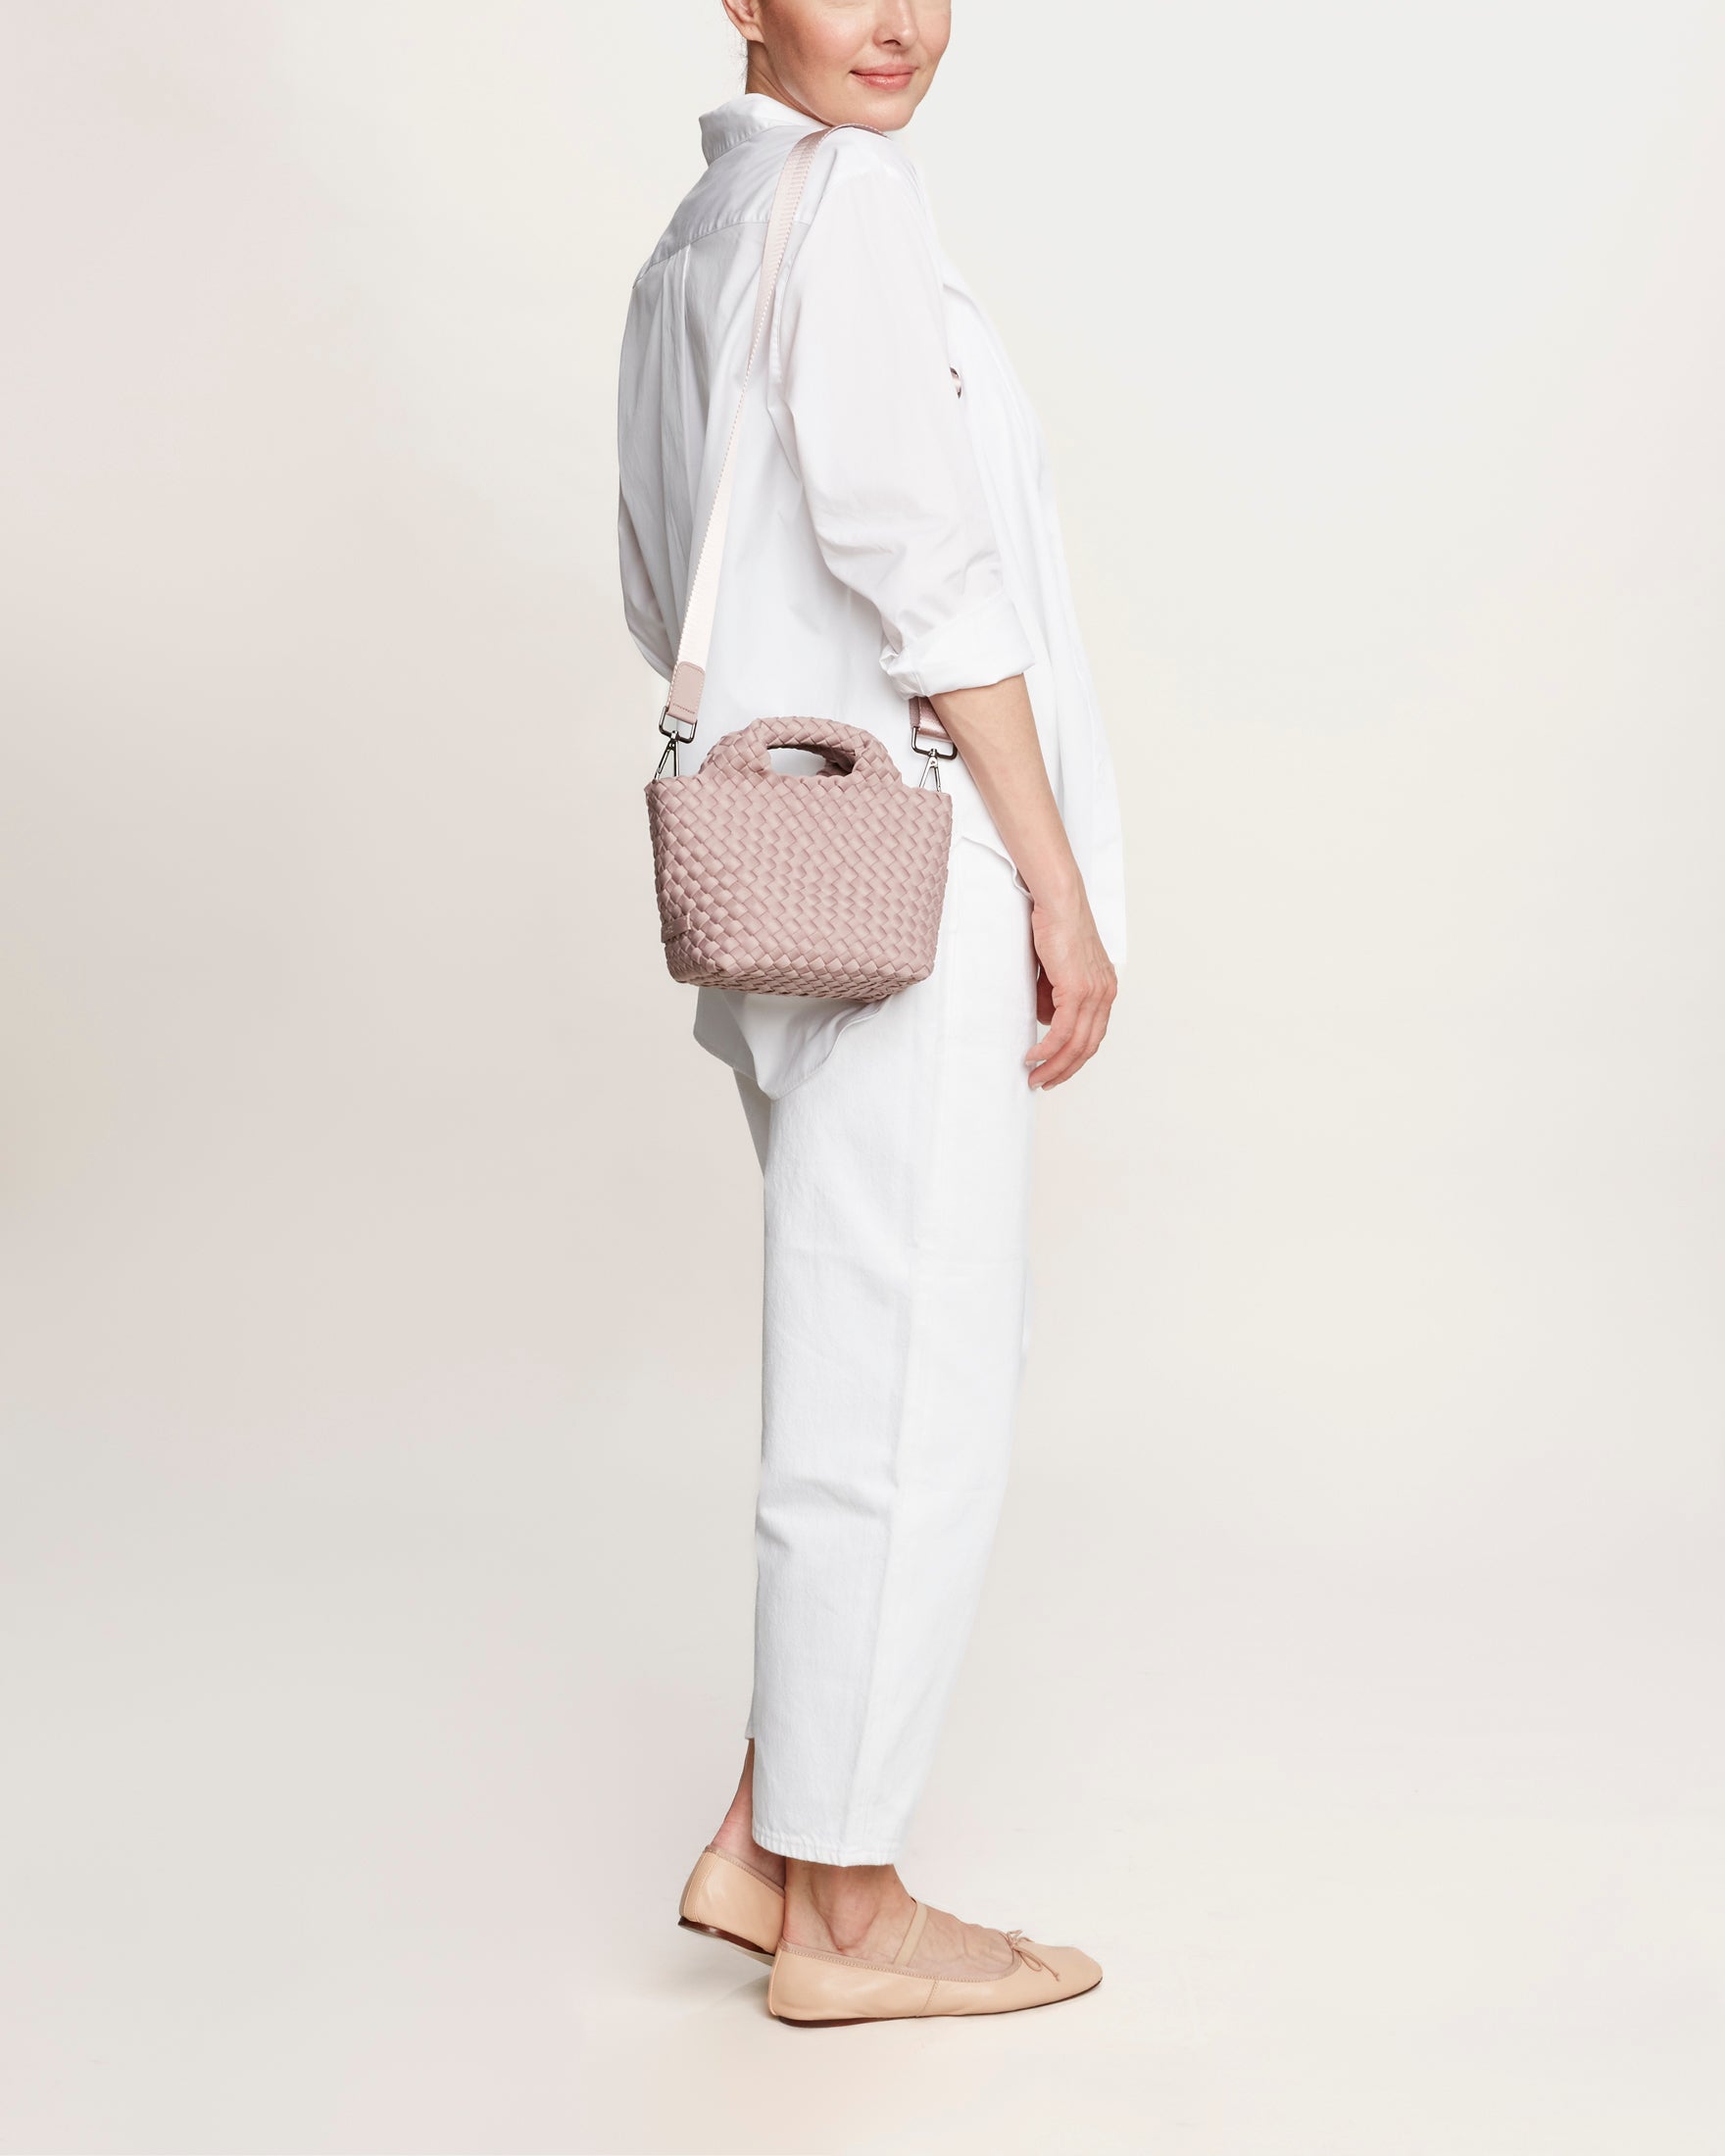 St. Barths Petit Tote | Lilac | Pouch